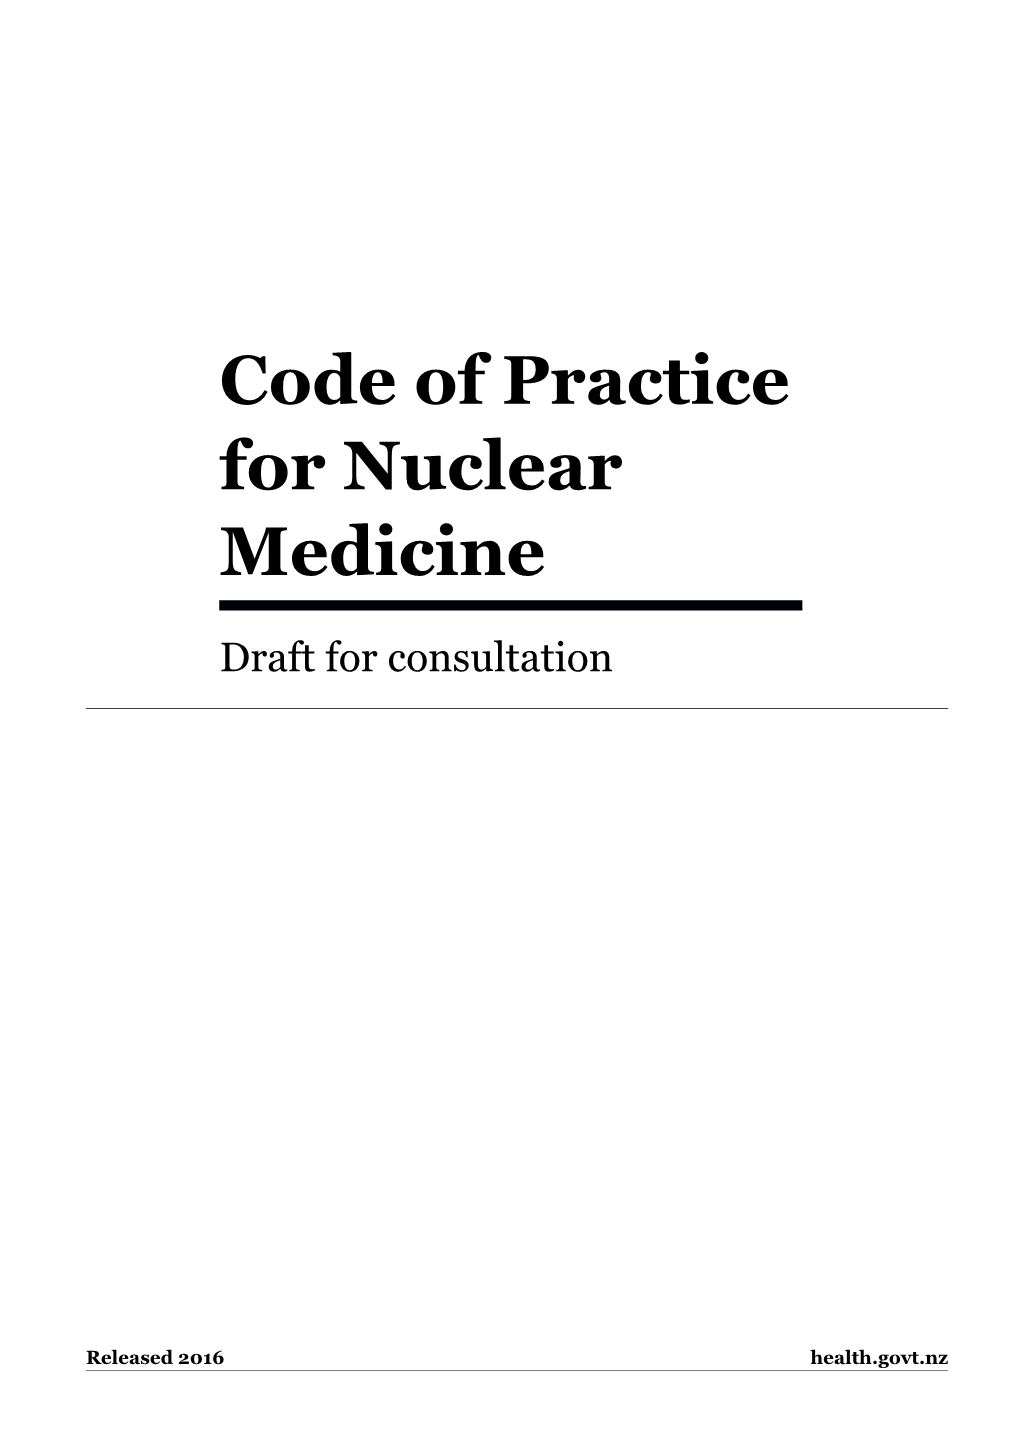 Code of Practice for Nuclear Medicine